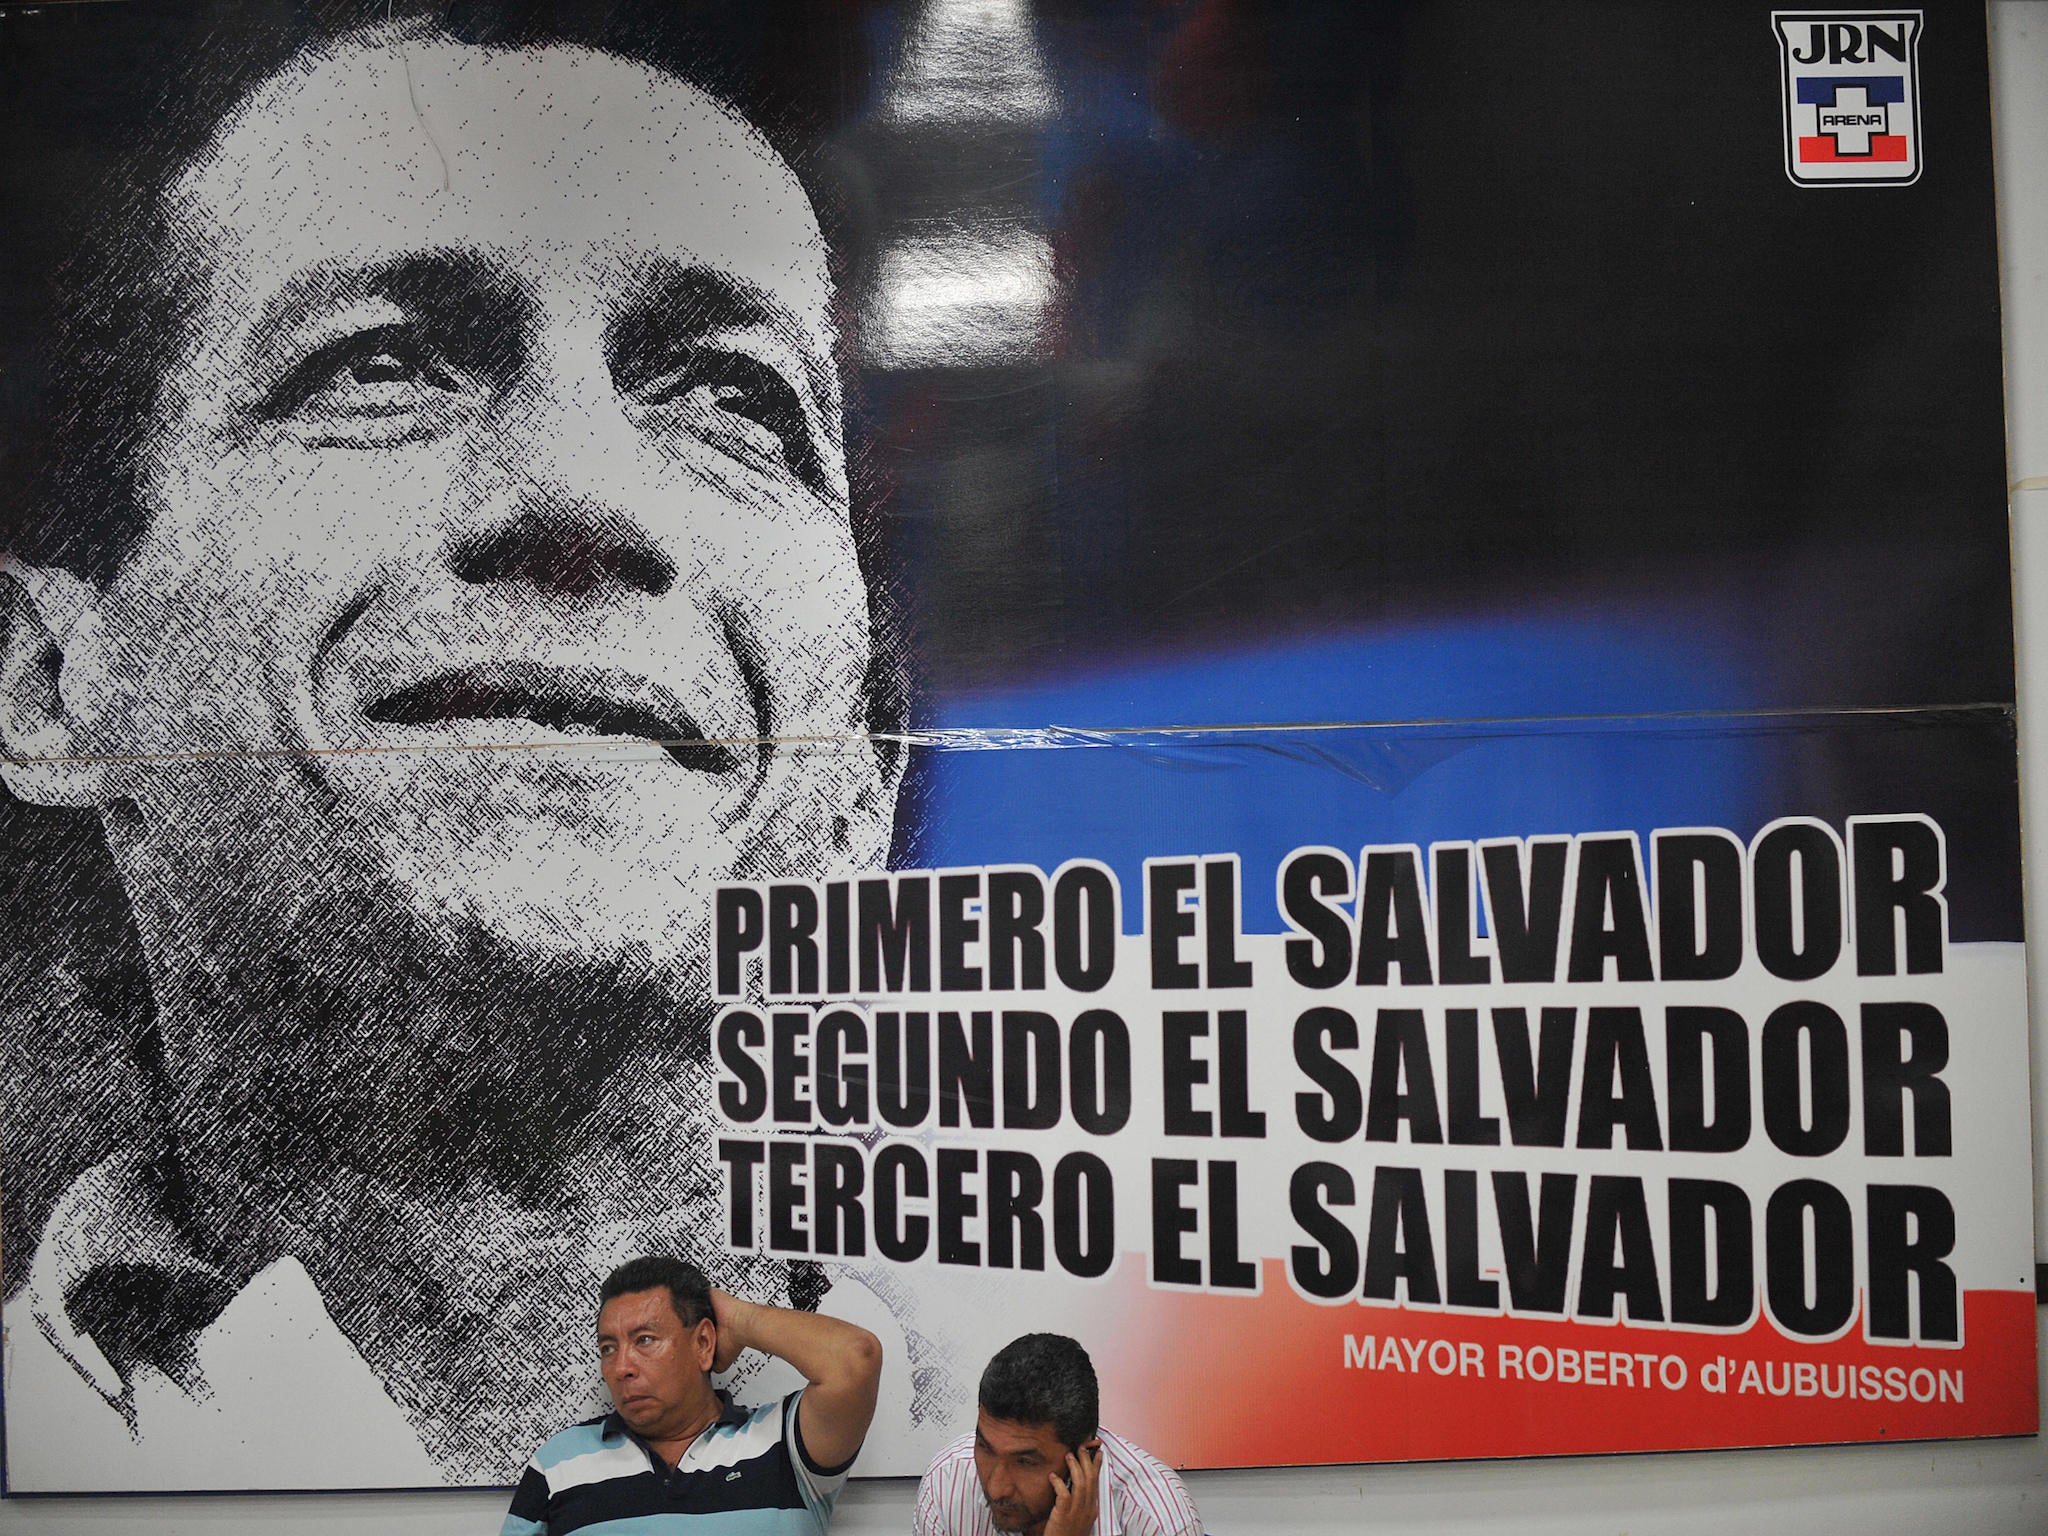 Supporters of El Salvador's National Republican Alliance and a banner showing its founder Roberto D'aubuisson